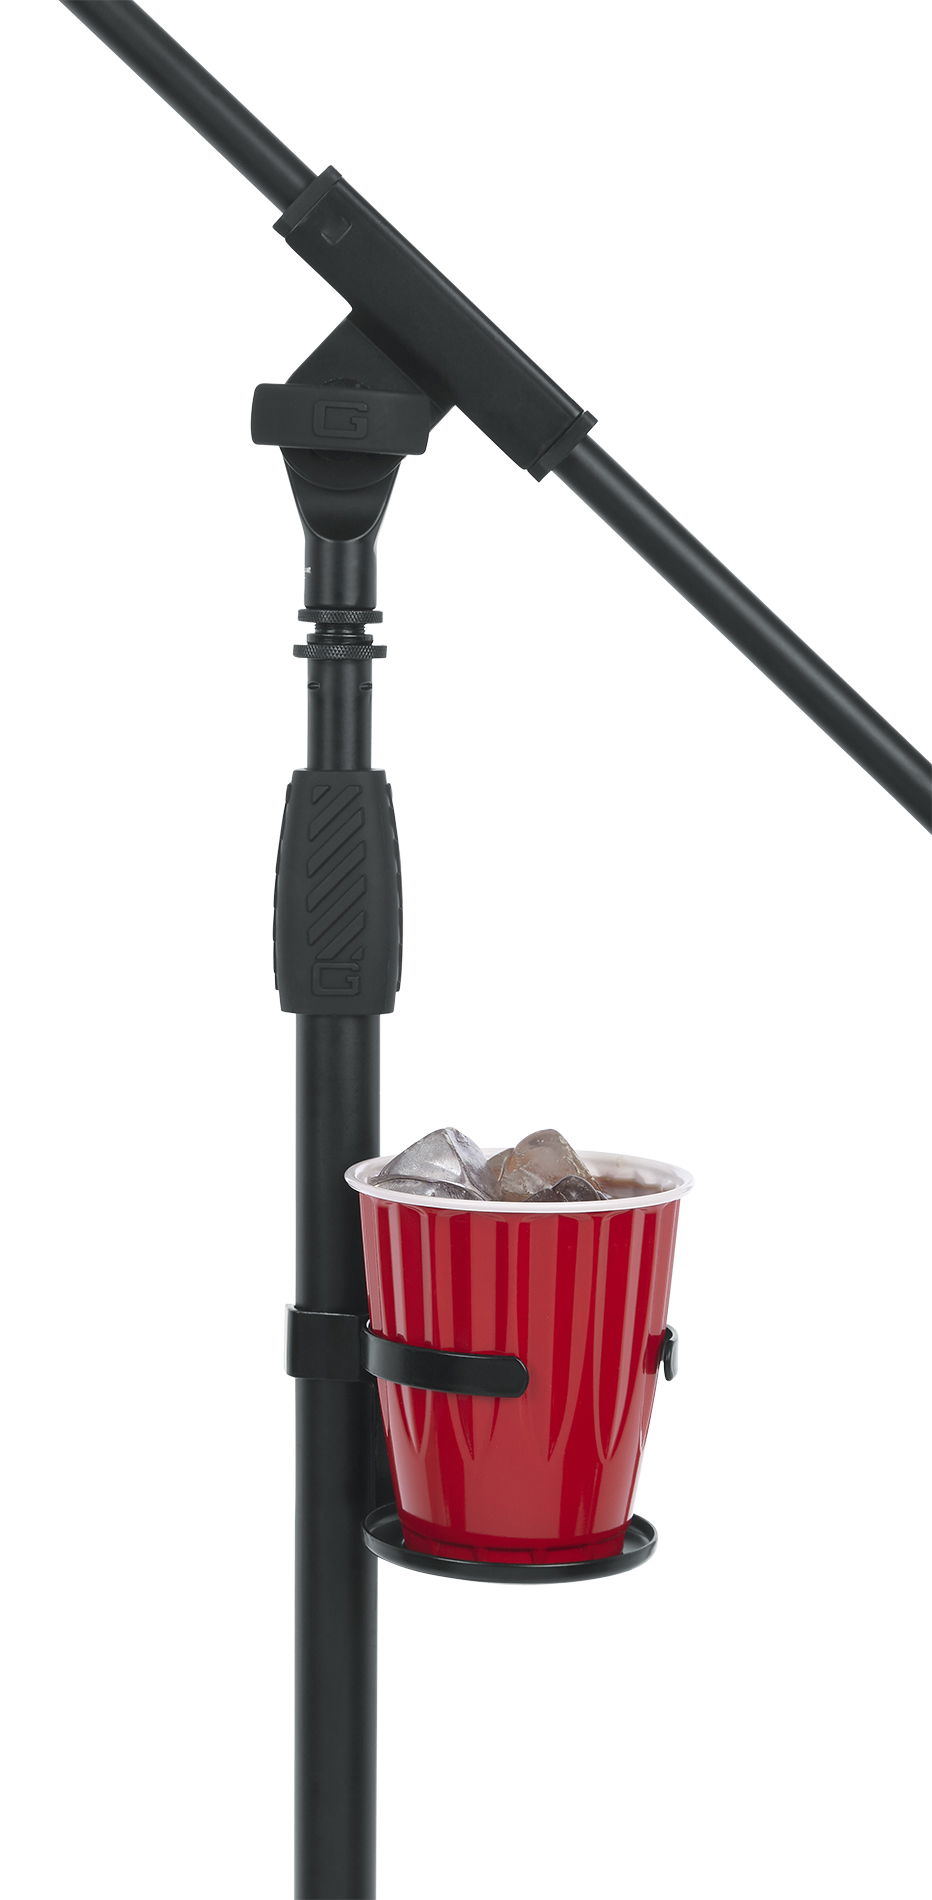 Single Cup Beverage Holder Mount for Stand-GFW-SINGLECUP